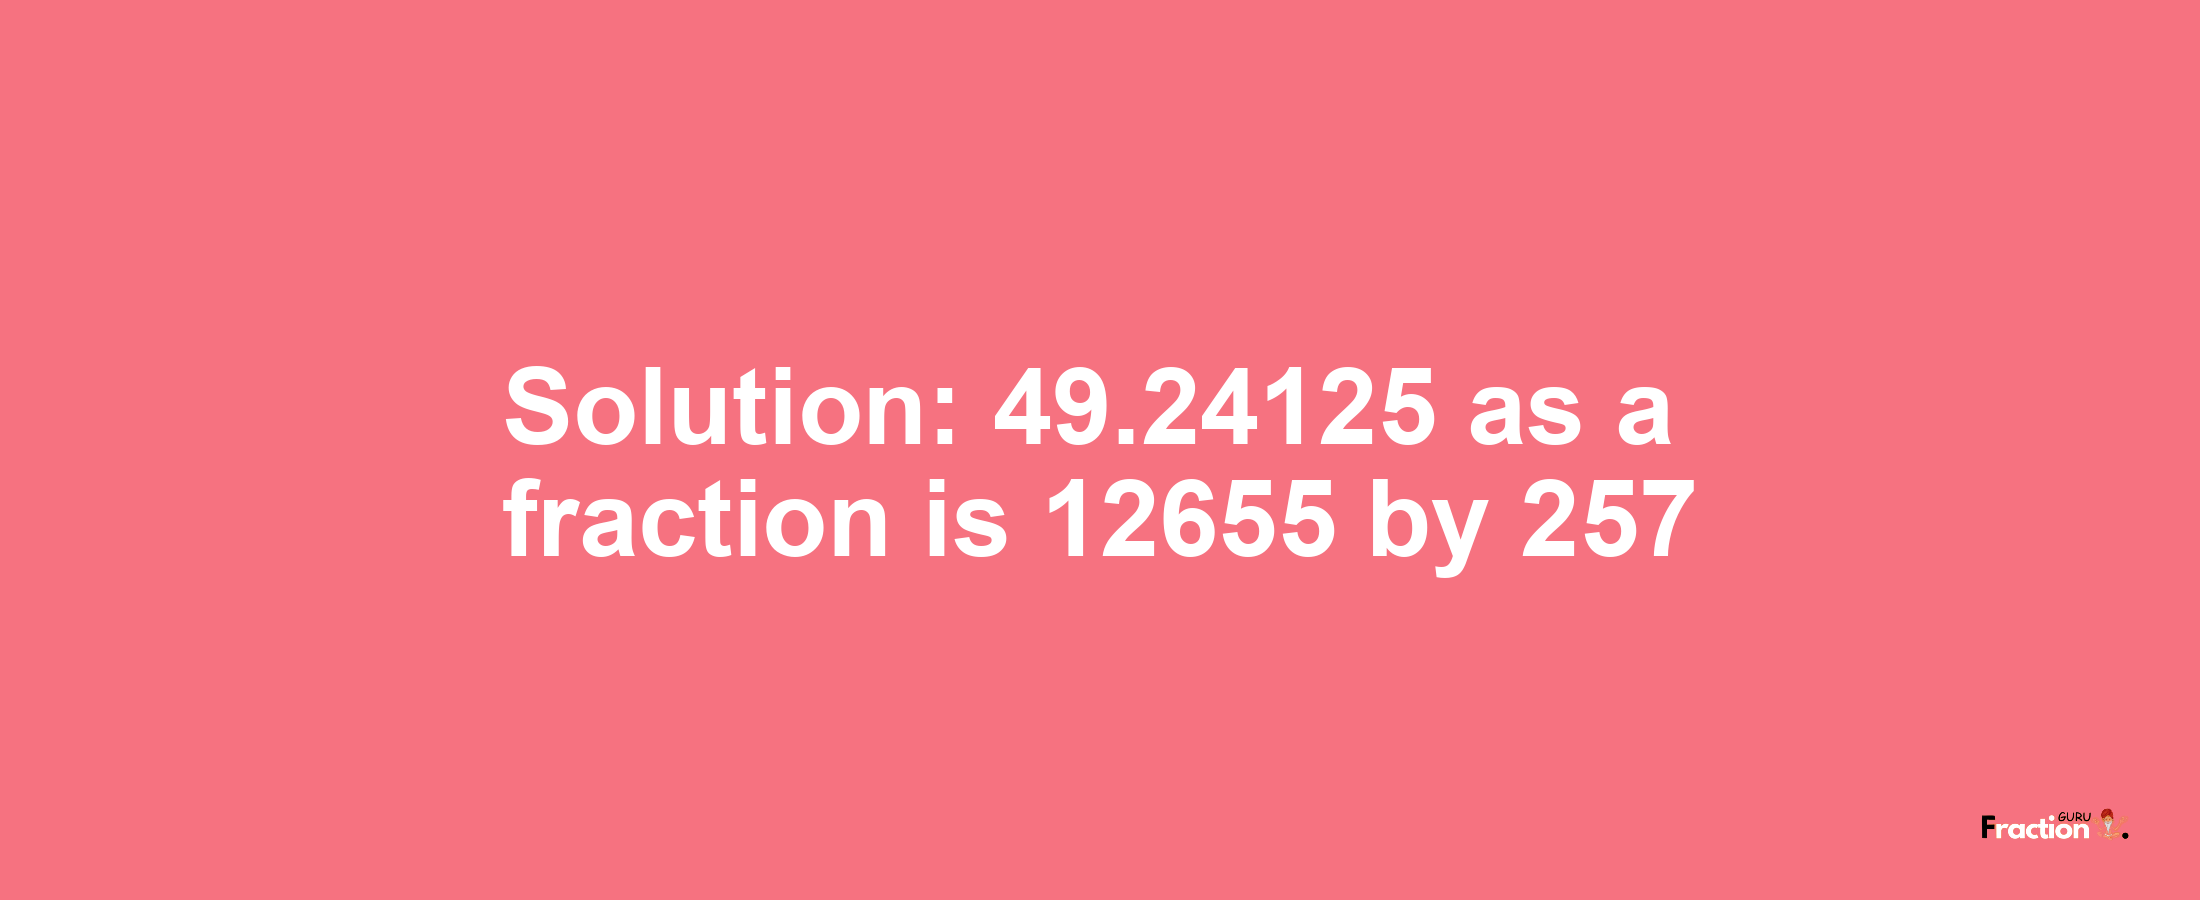 Solution:49.24125 as a fraction is 12655/257